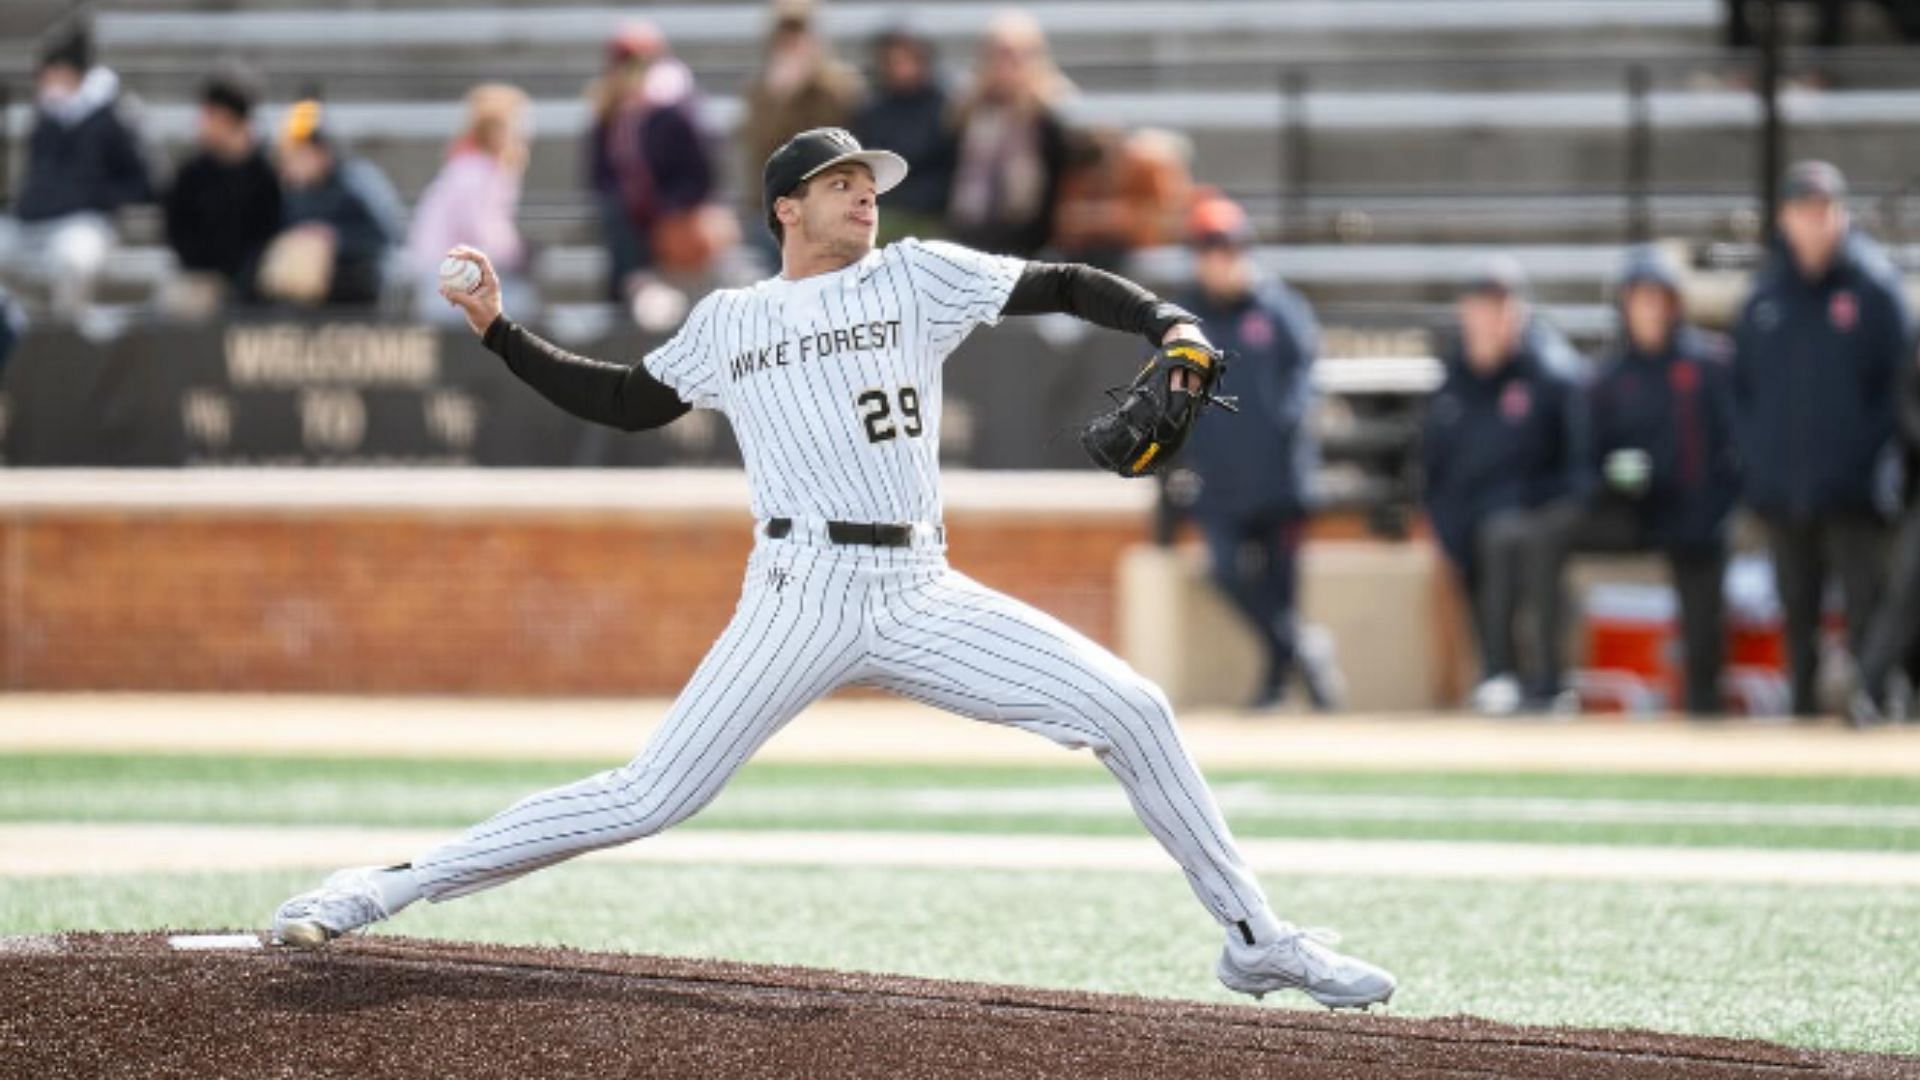 Chase Burns has struck out 140 batters for Wake Forest.